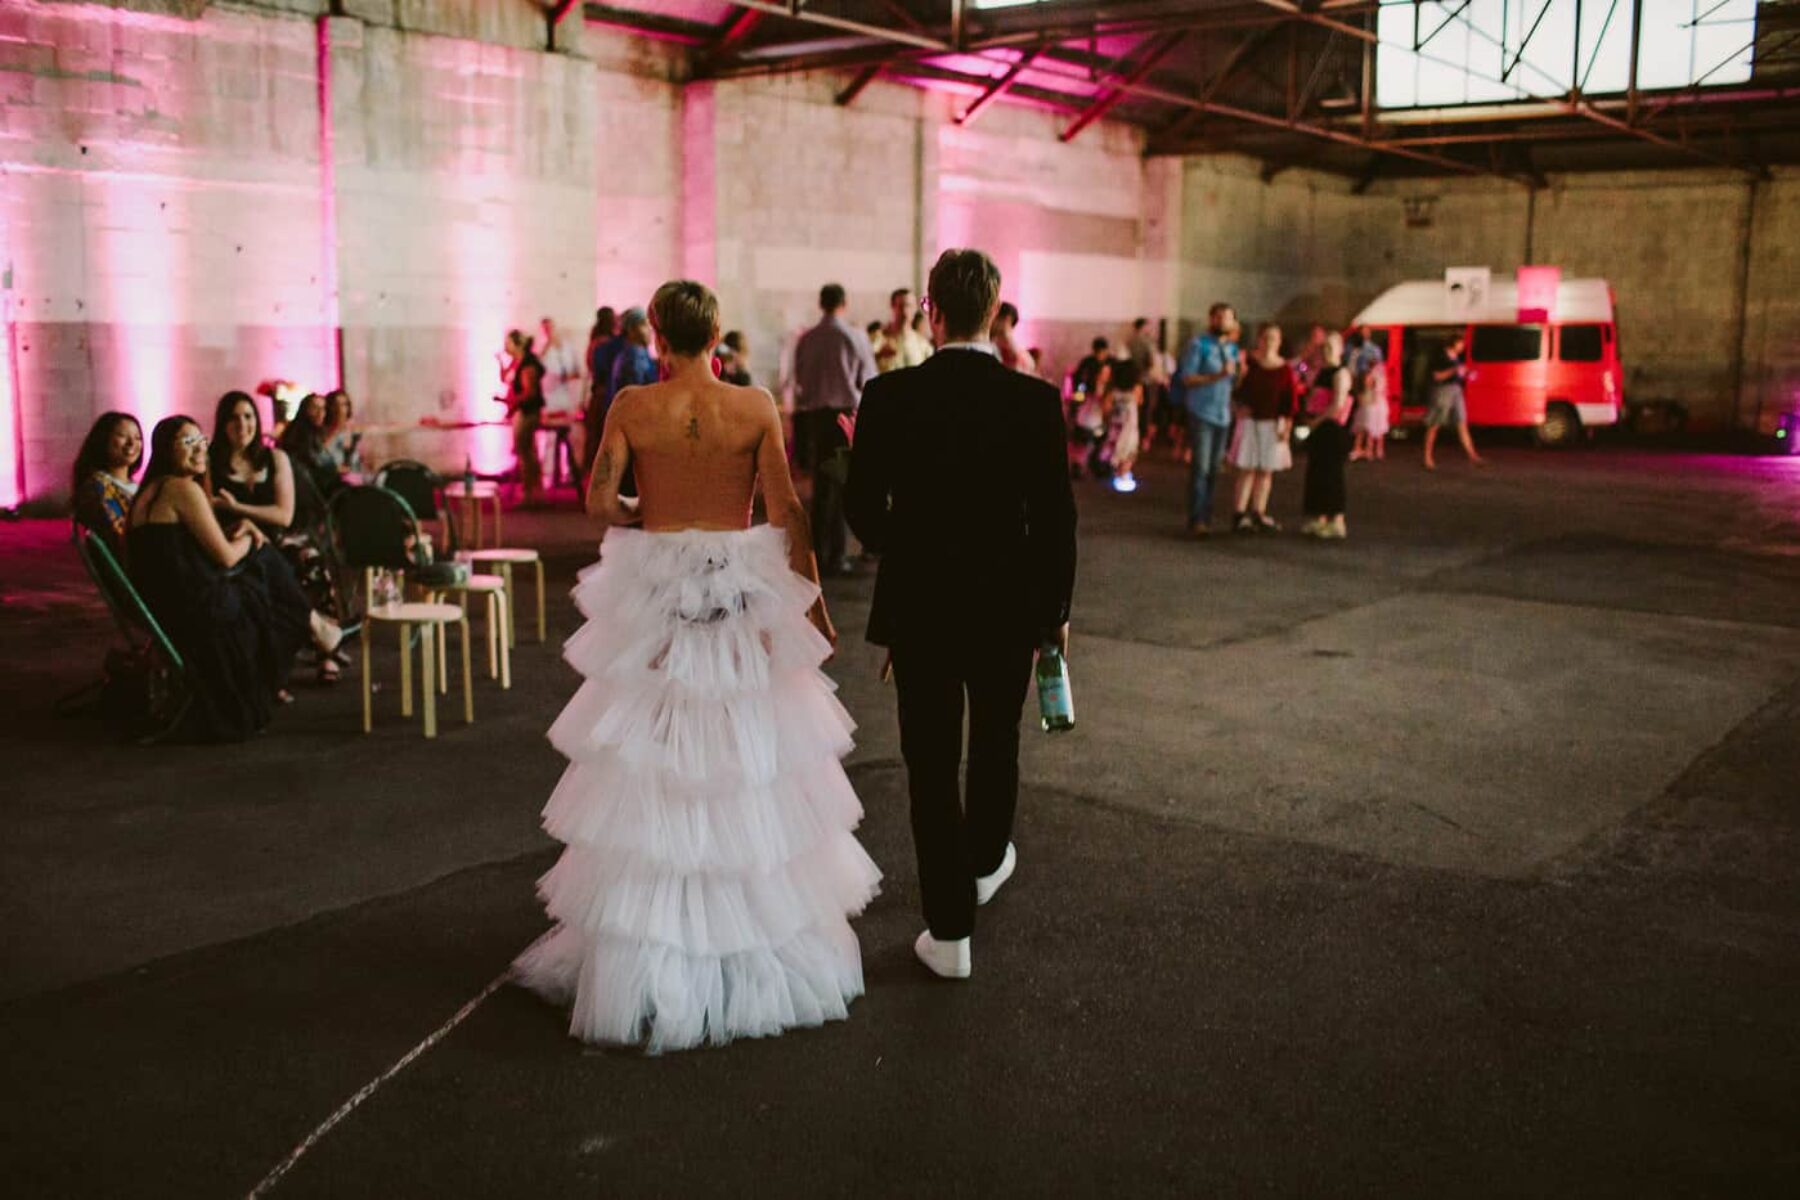 pop-up warehouse wedding in a car park in Adelaide